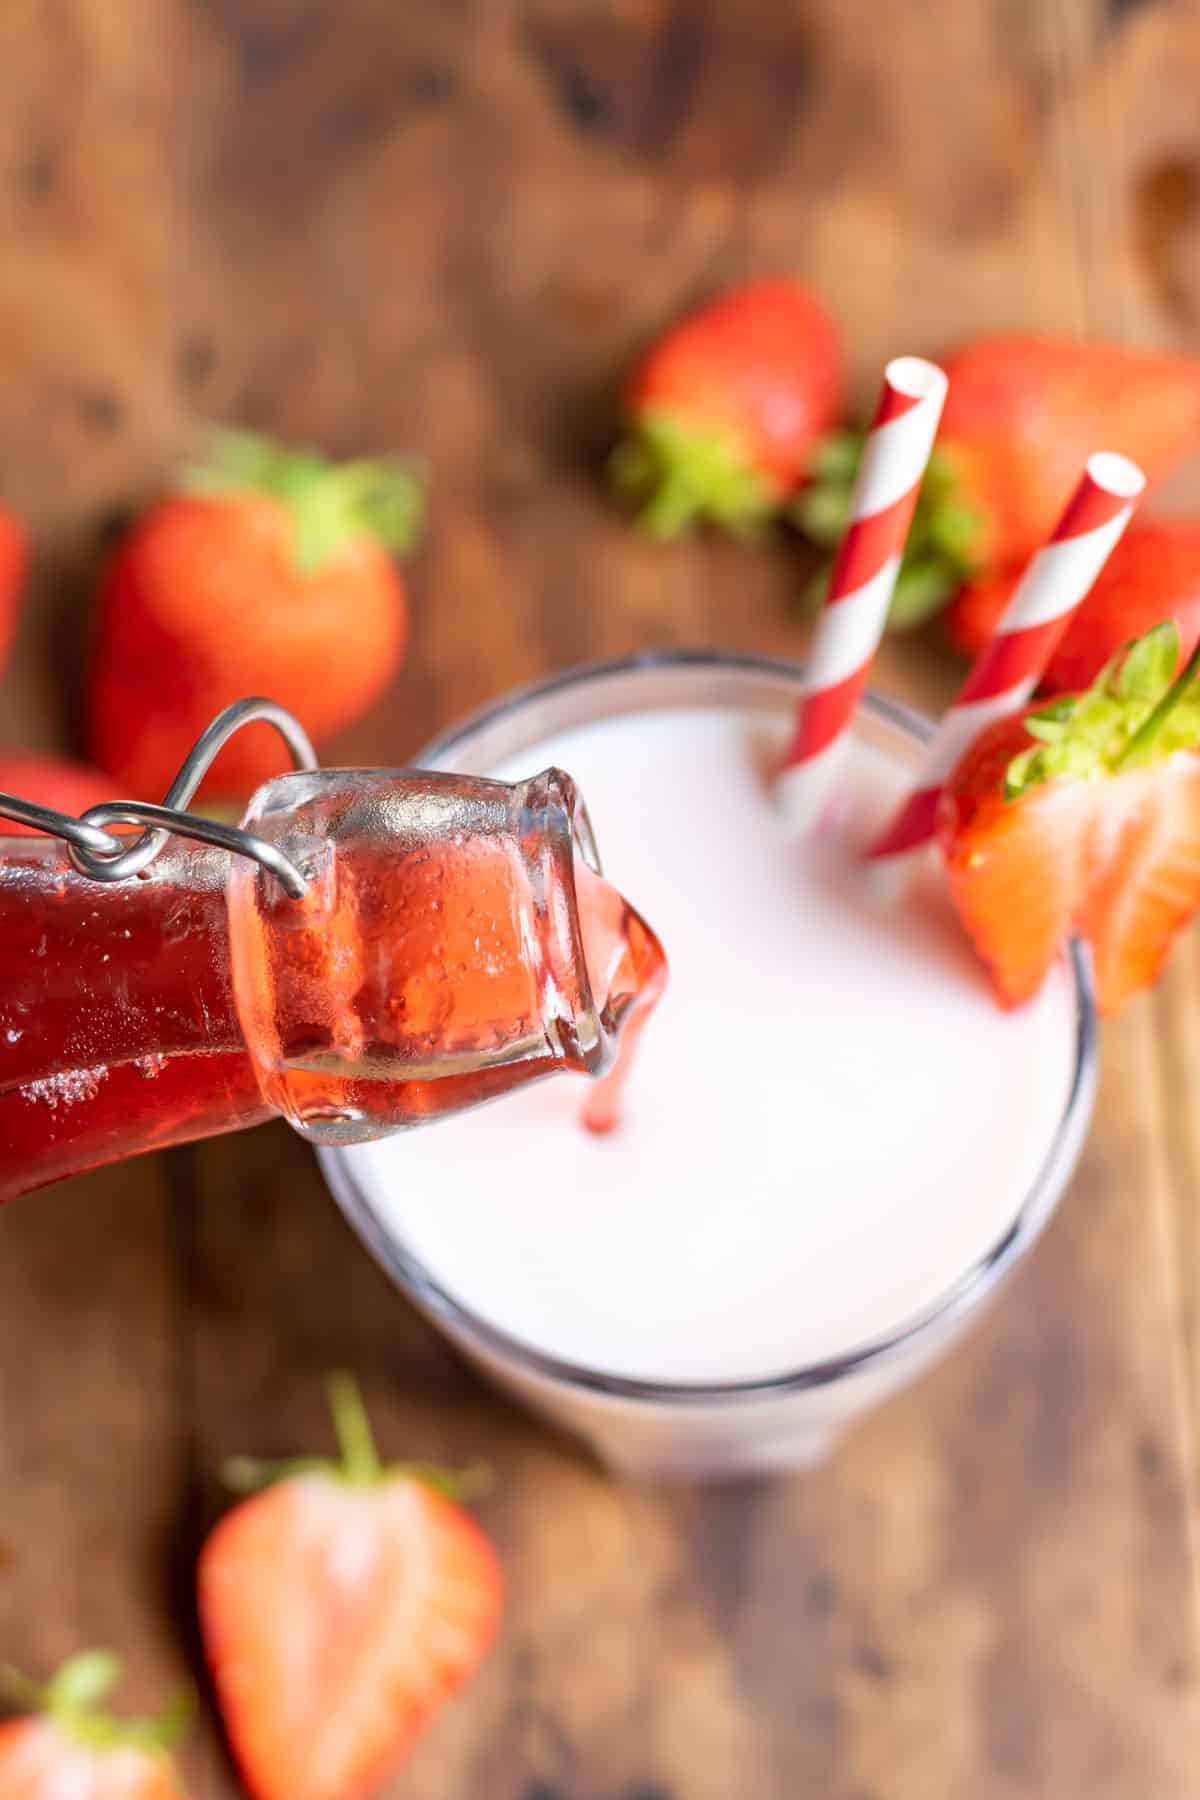 Strawberry syrup being poured into a glass of milk.